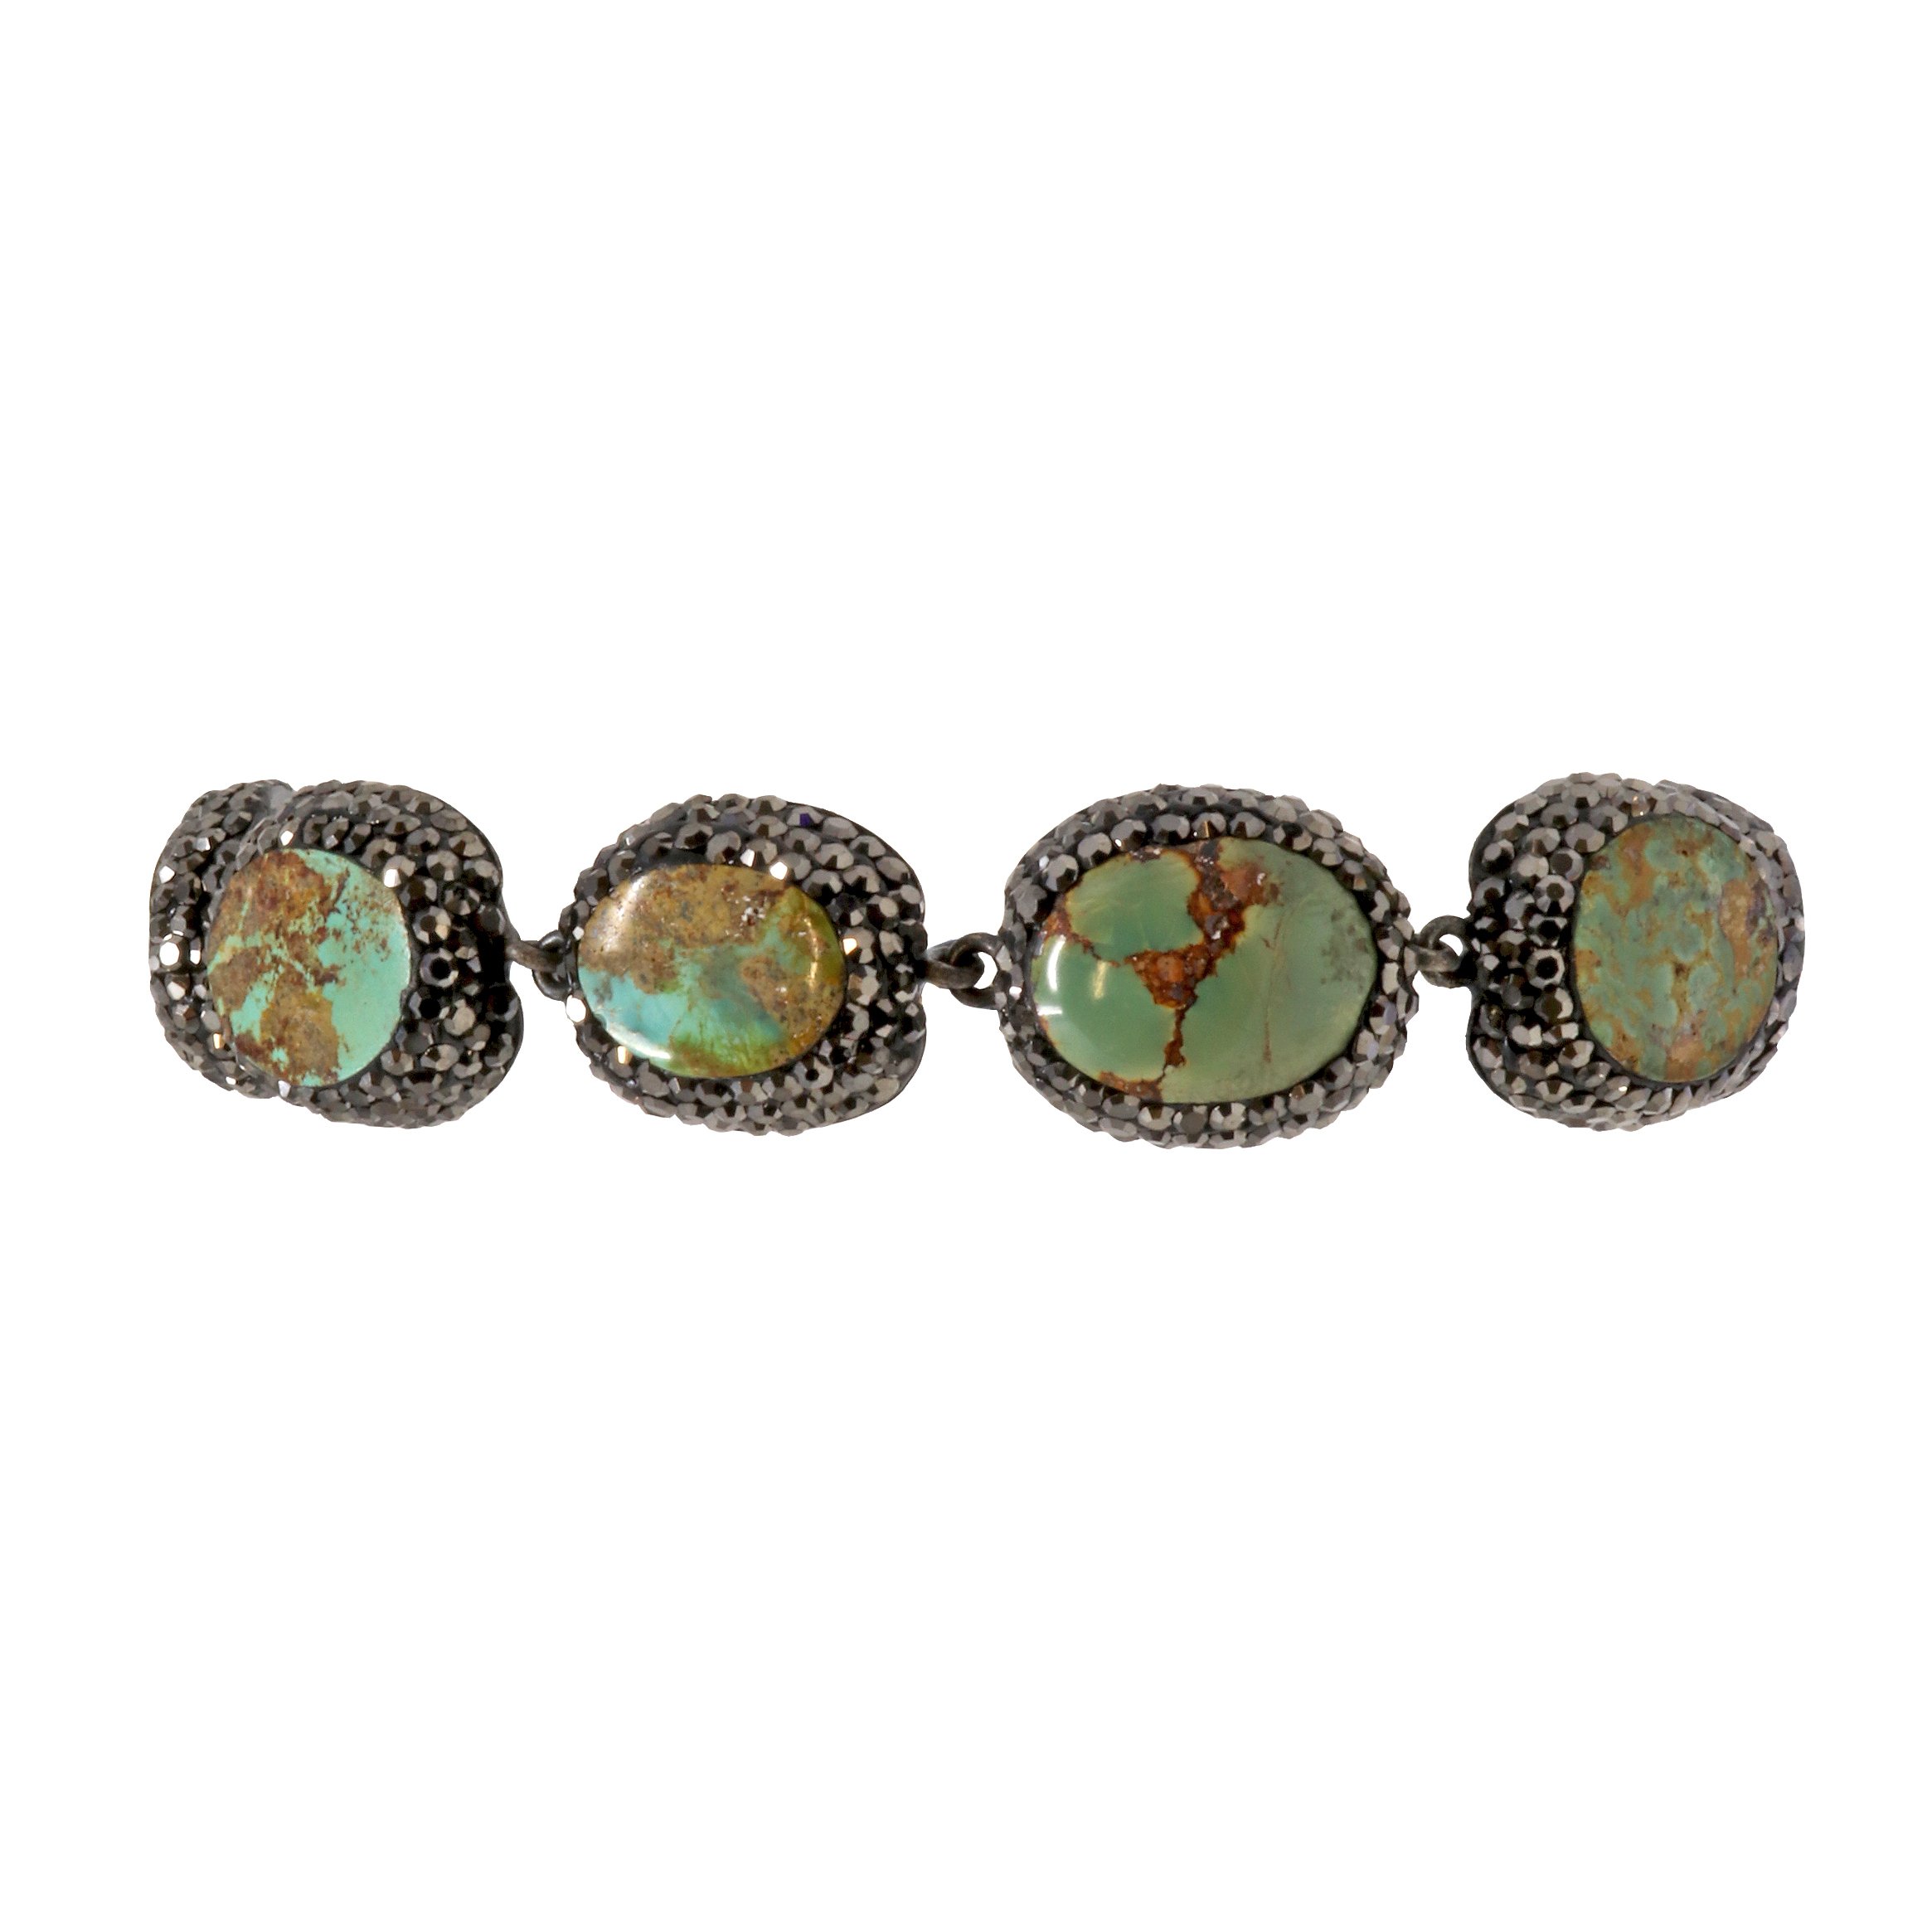 Persian Turquoise Link Bracelet -Ovals with Marcasite